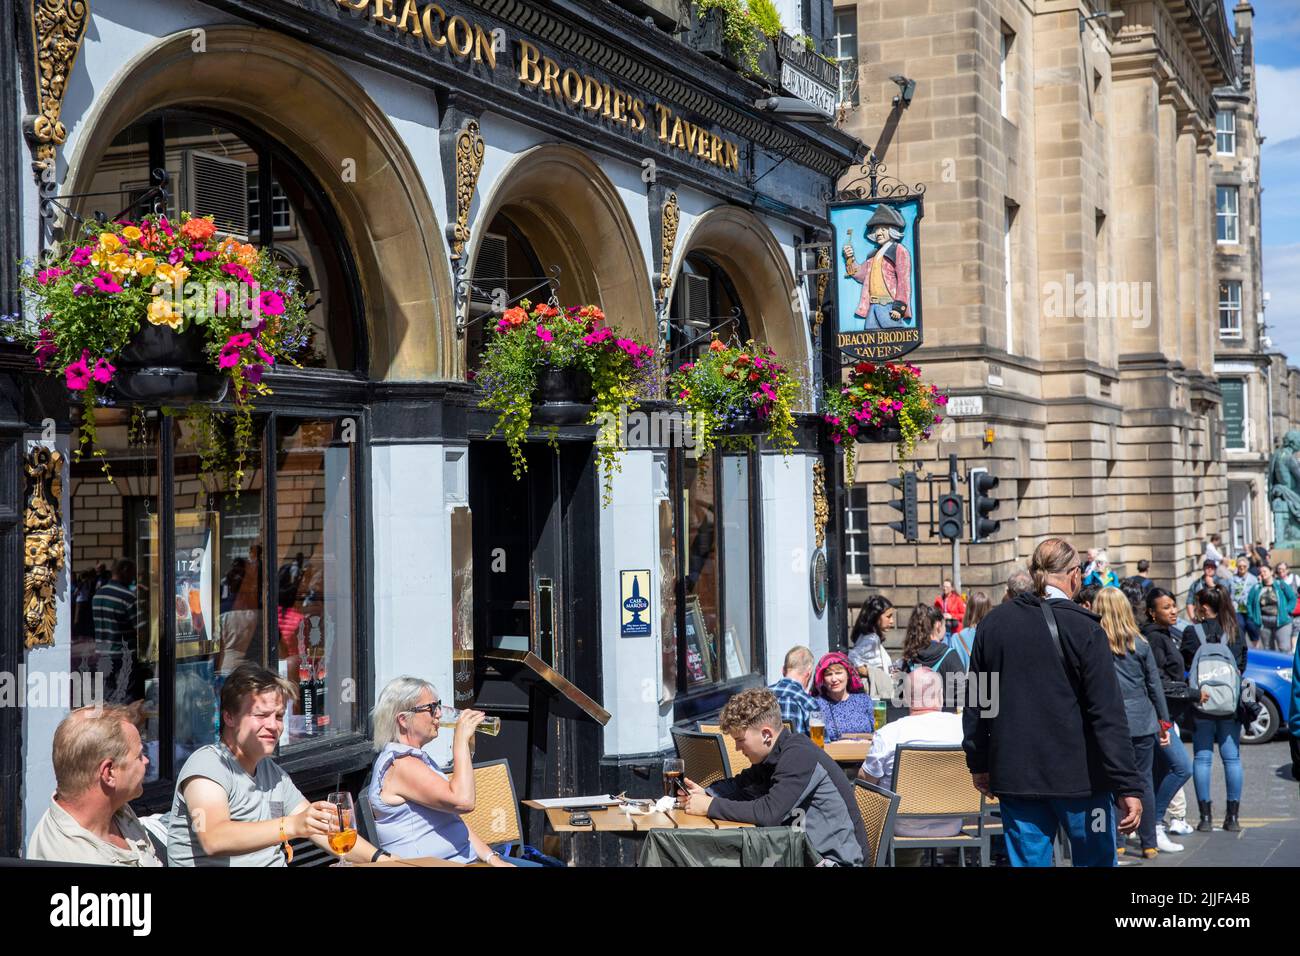 Deacon Brodies tavern on lawnmarket Royal Mile Edinburgh, named after William Brodie a 18th century councillor, locksmith  and housebreaker, Edinburgh Stock Photo